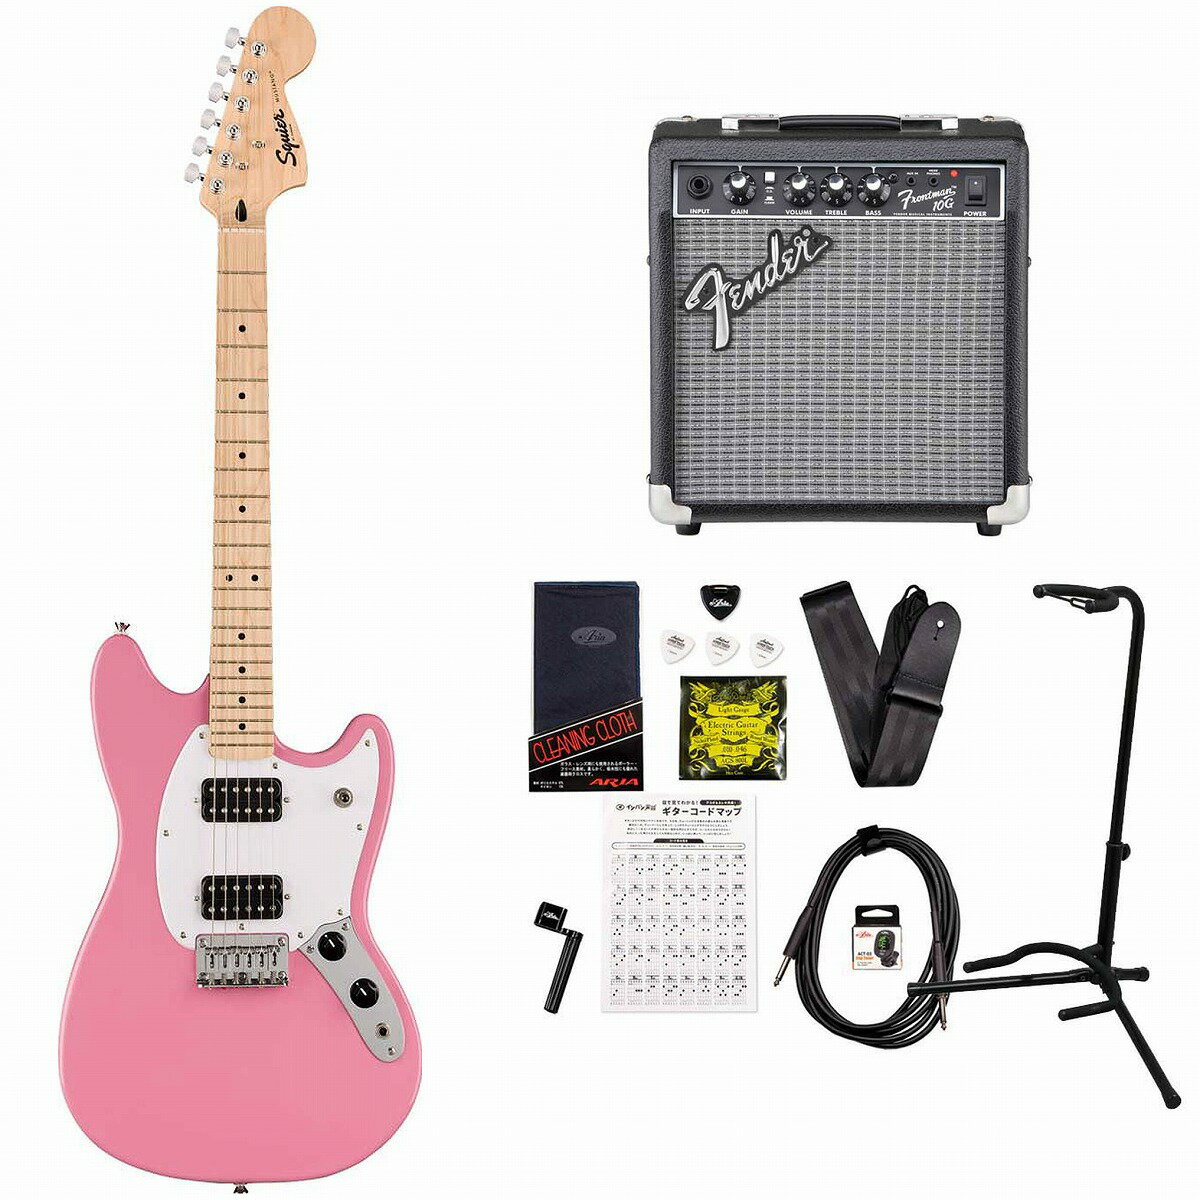 Squier by Fender / Sonic Mustang HH Maple Fingerboard White Pickguard Flash Pink FenderFrontman10Gアンプ付属エレキギター初心者セット【YRK】《+4582600680067》